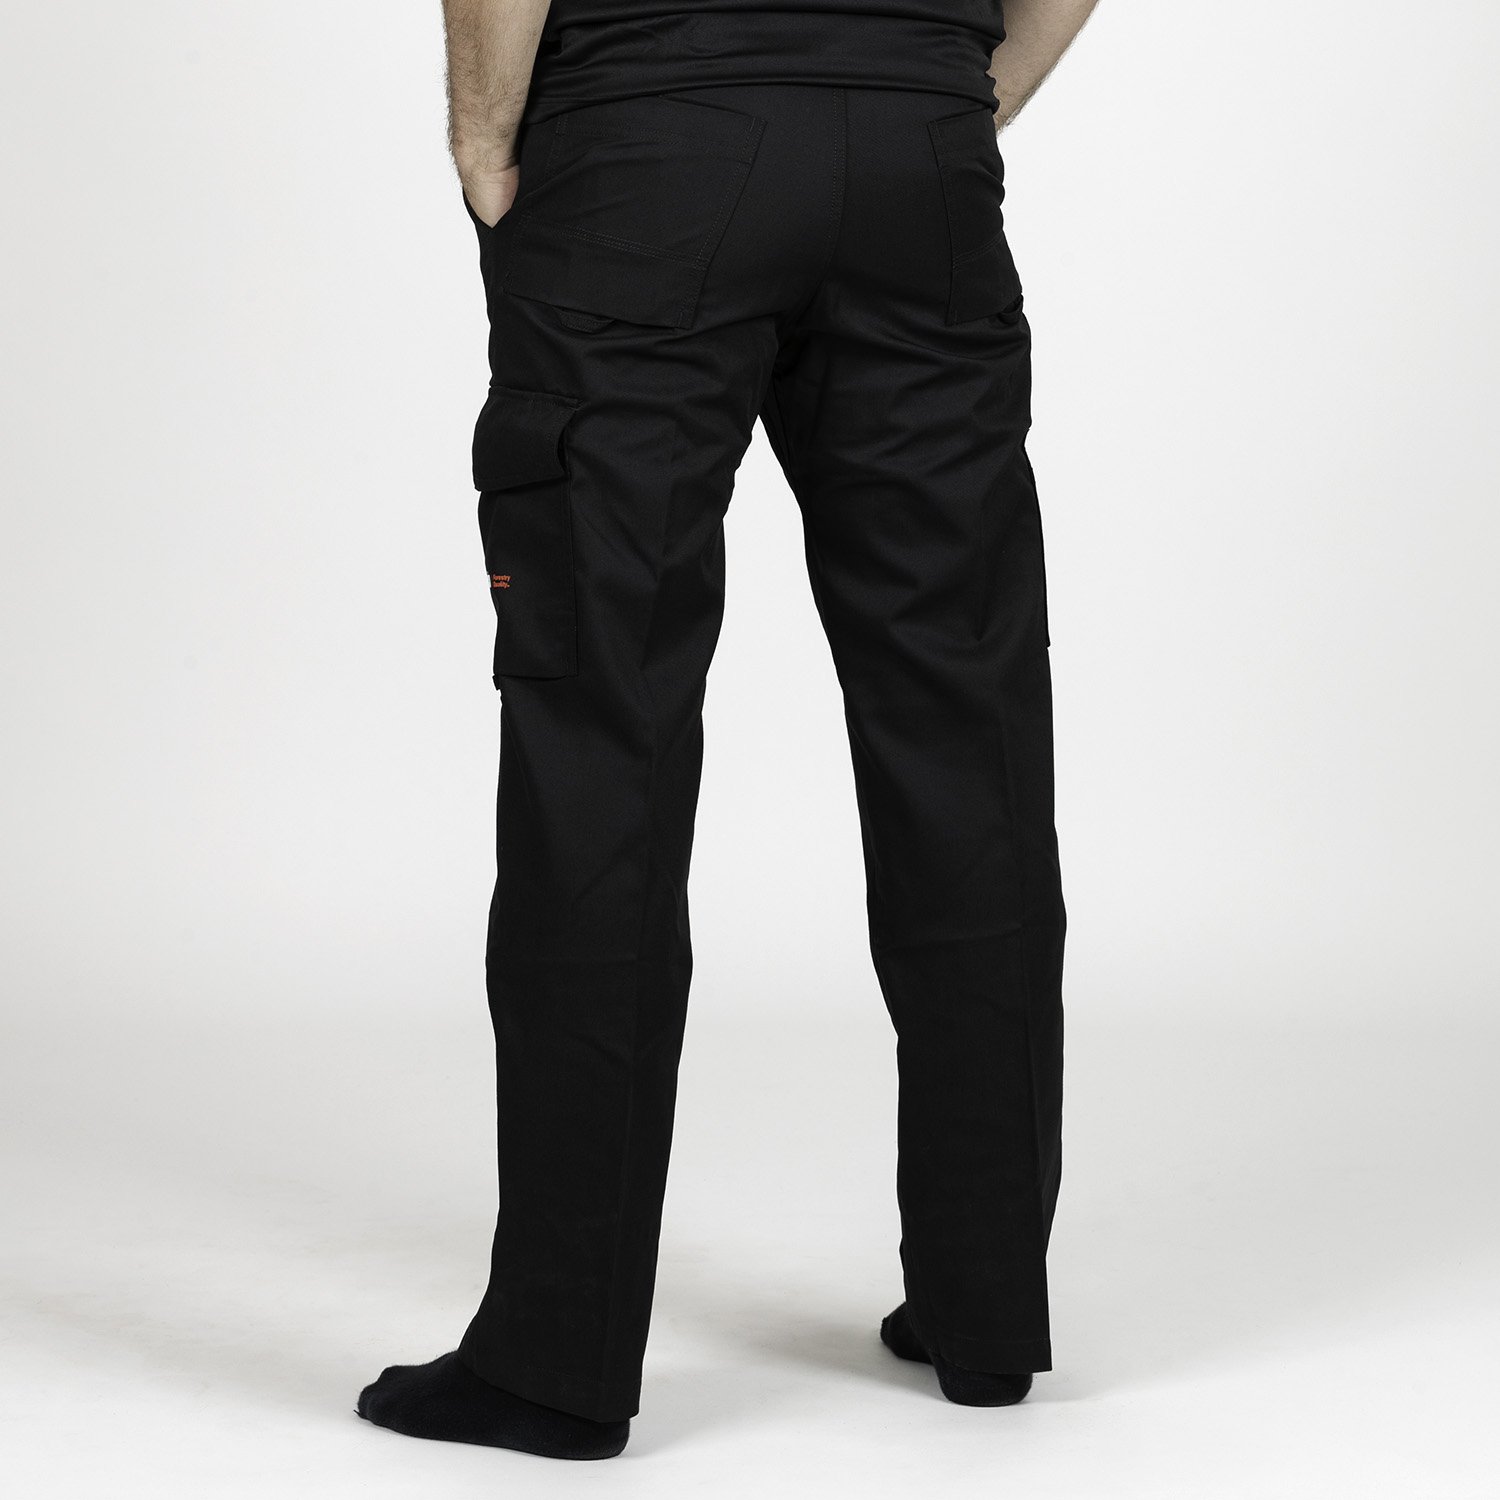 IBEX Multi Pockets Mens Combat Cargo Work Trousers with Knee Pad Pock   IBEXWORKWEAR